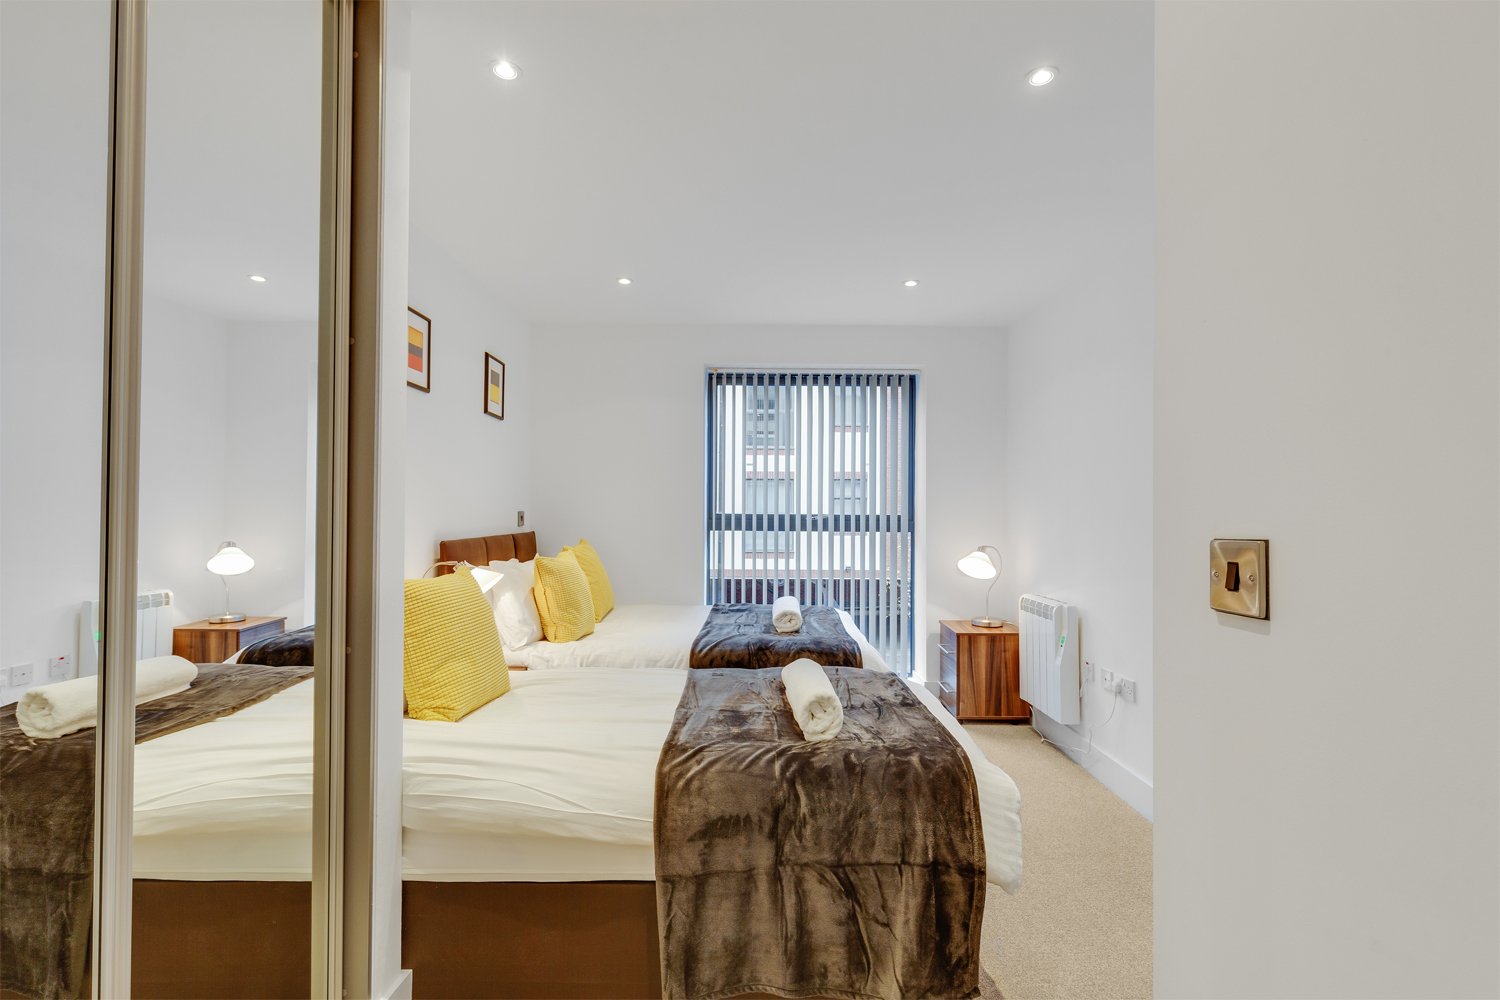 Book-the-Best-Serviced-Apartments-Birmingham-today!-Our-Short-Let-Accommodation-in-Birmingham's-Jewellery-Quarter---Free-Wifi-&-All-Bills-Incl!-30%-Cheaper!-Urban-Stay